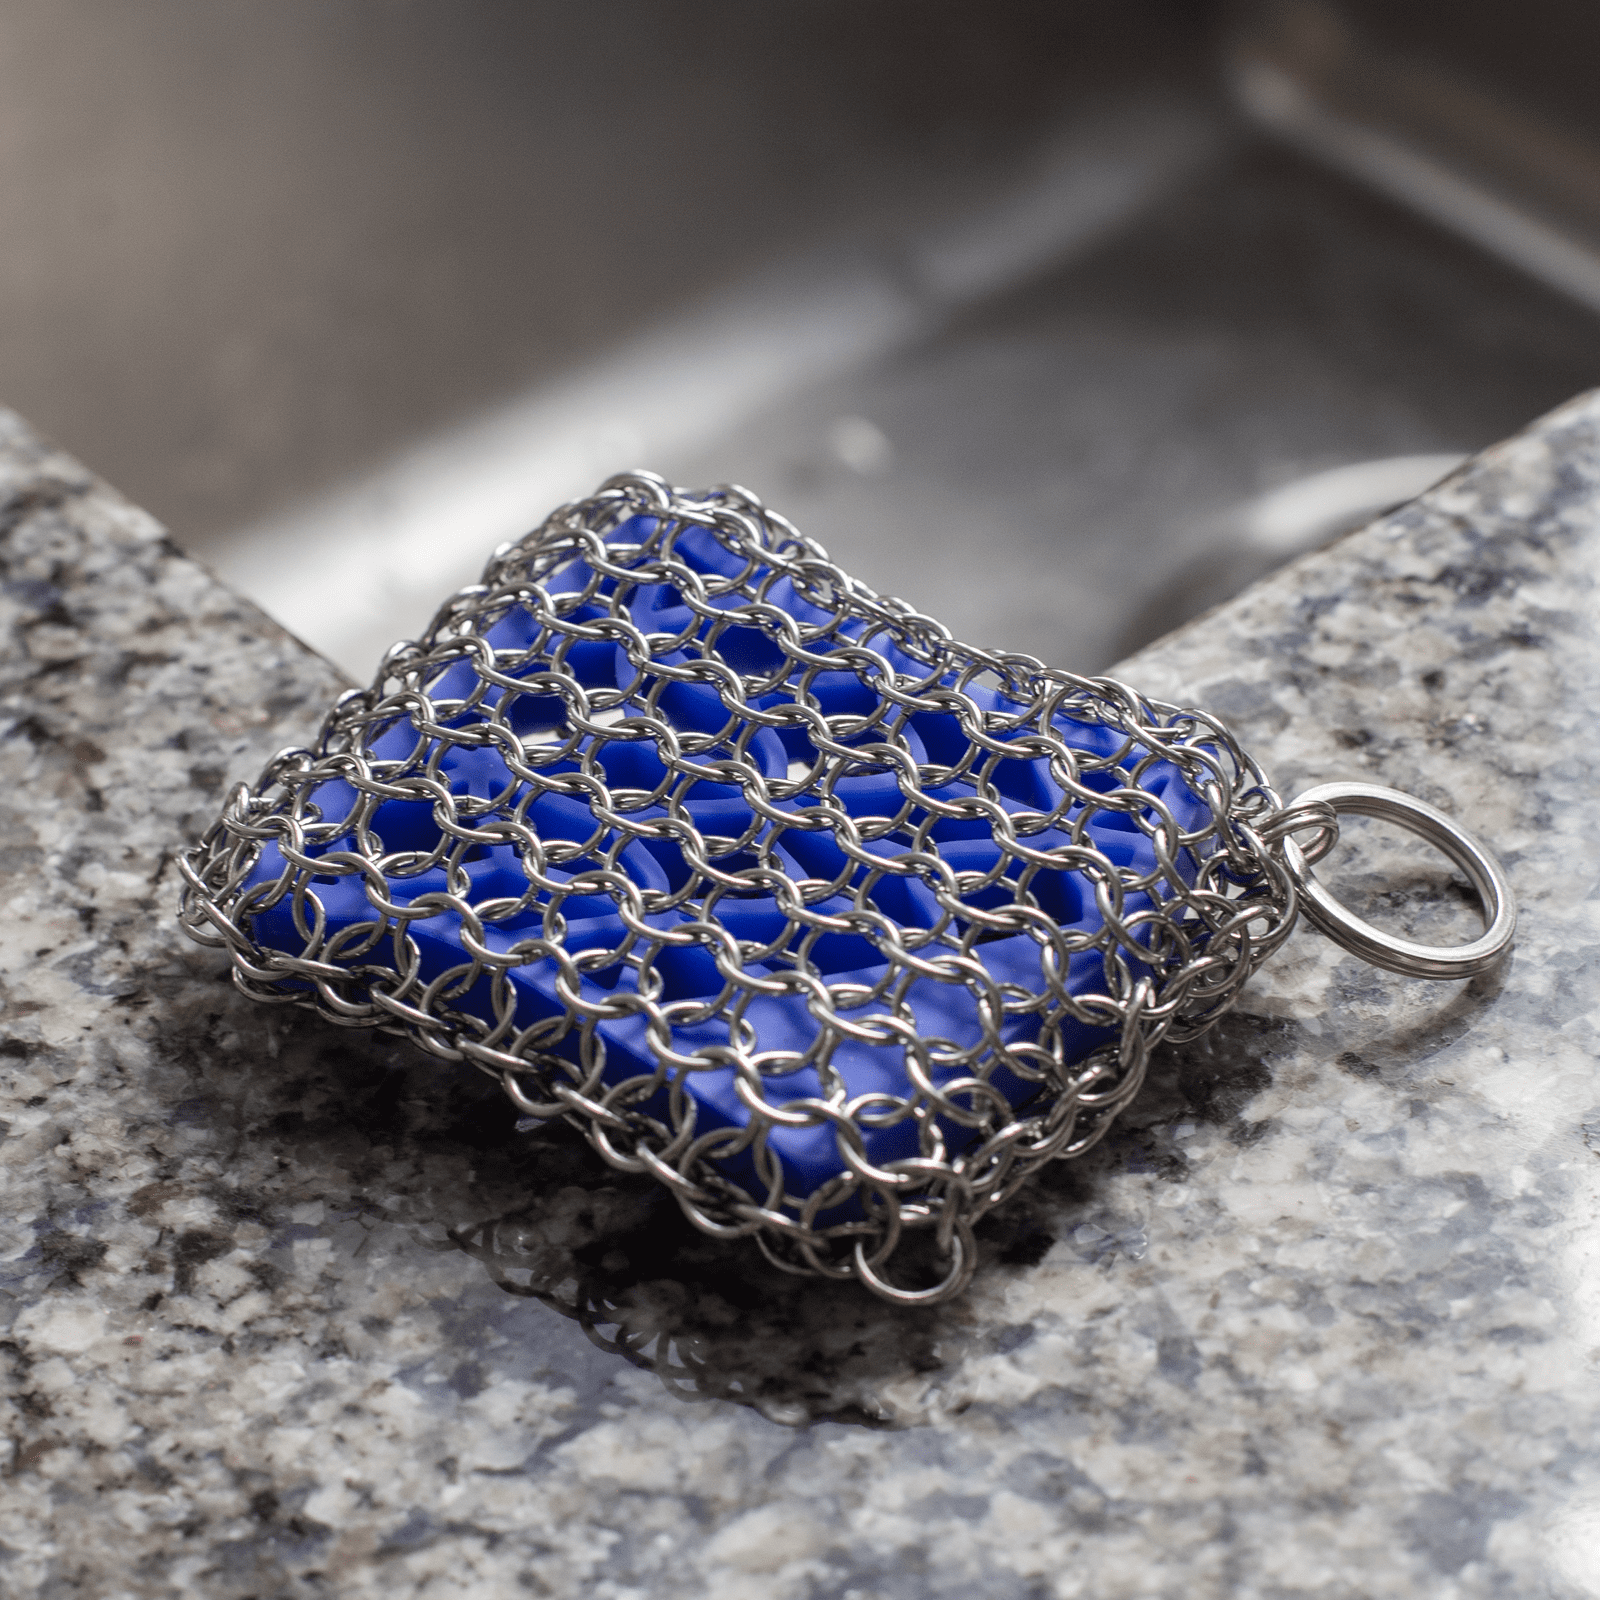 Williams Sonoma OPEN BOX: Lodge Cast Iron Care Kit with Chainmail